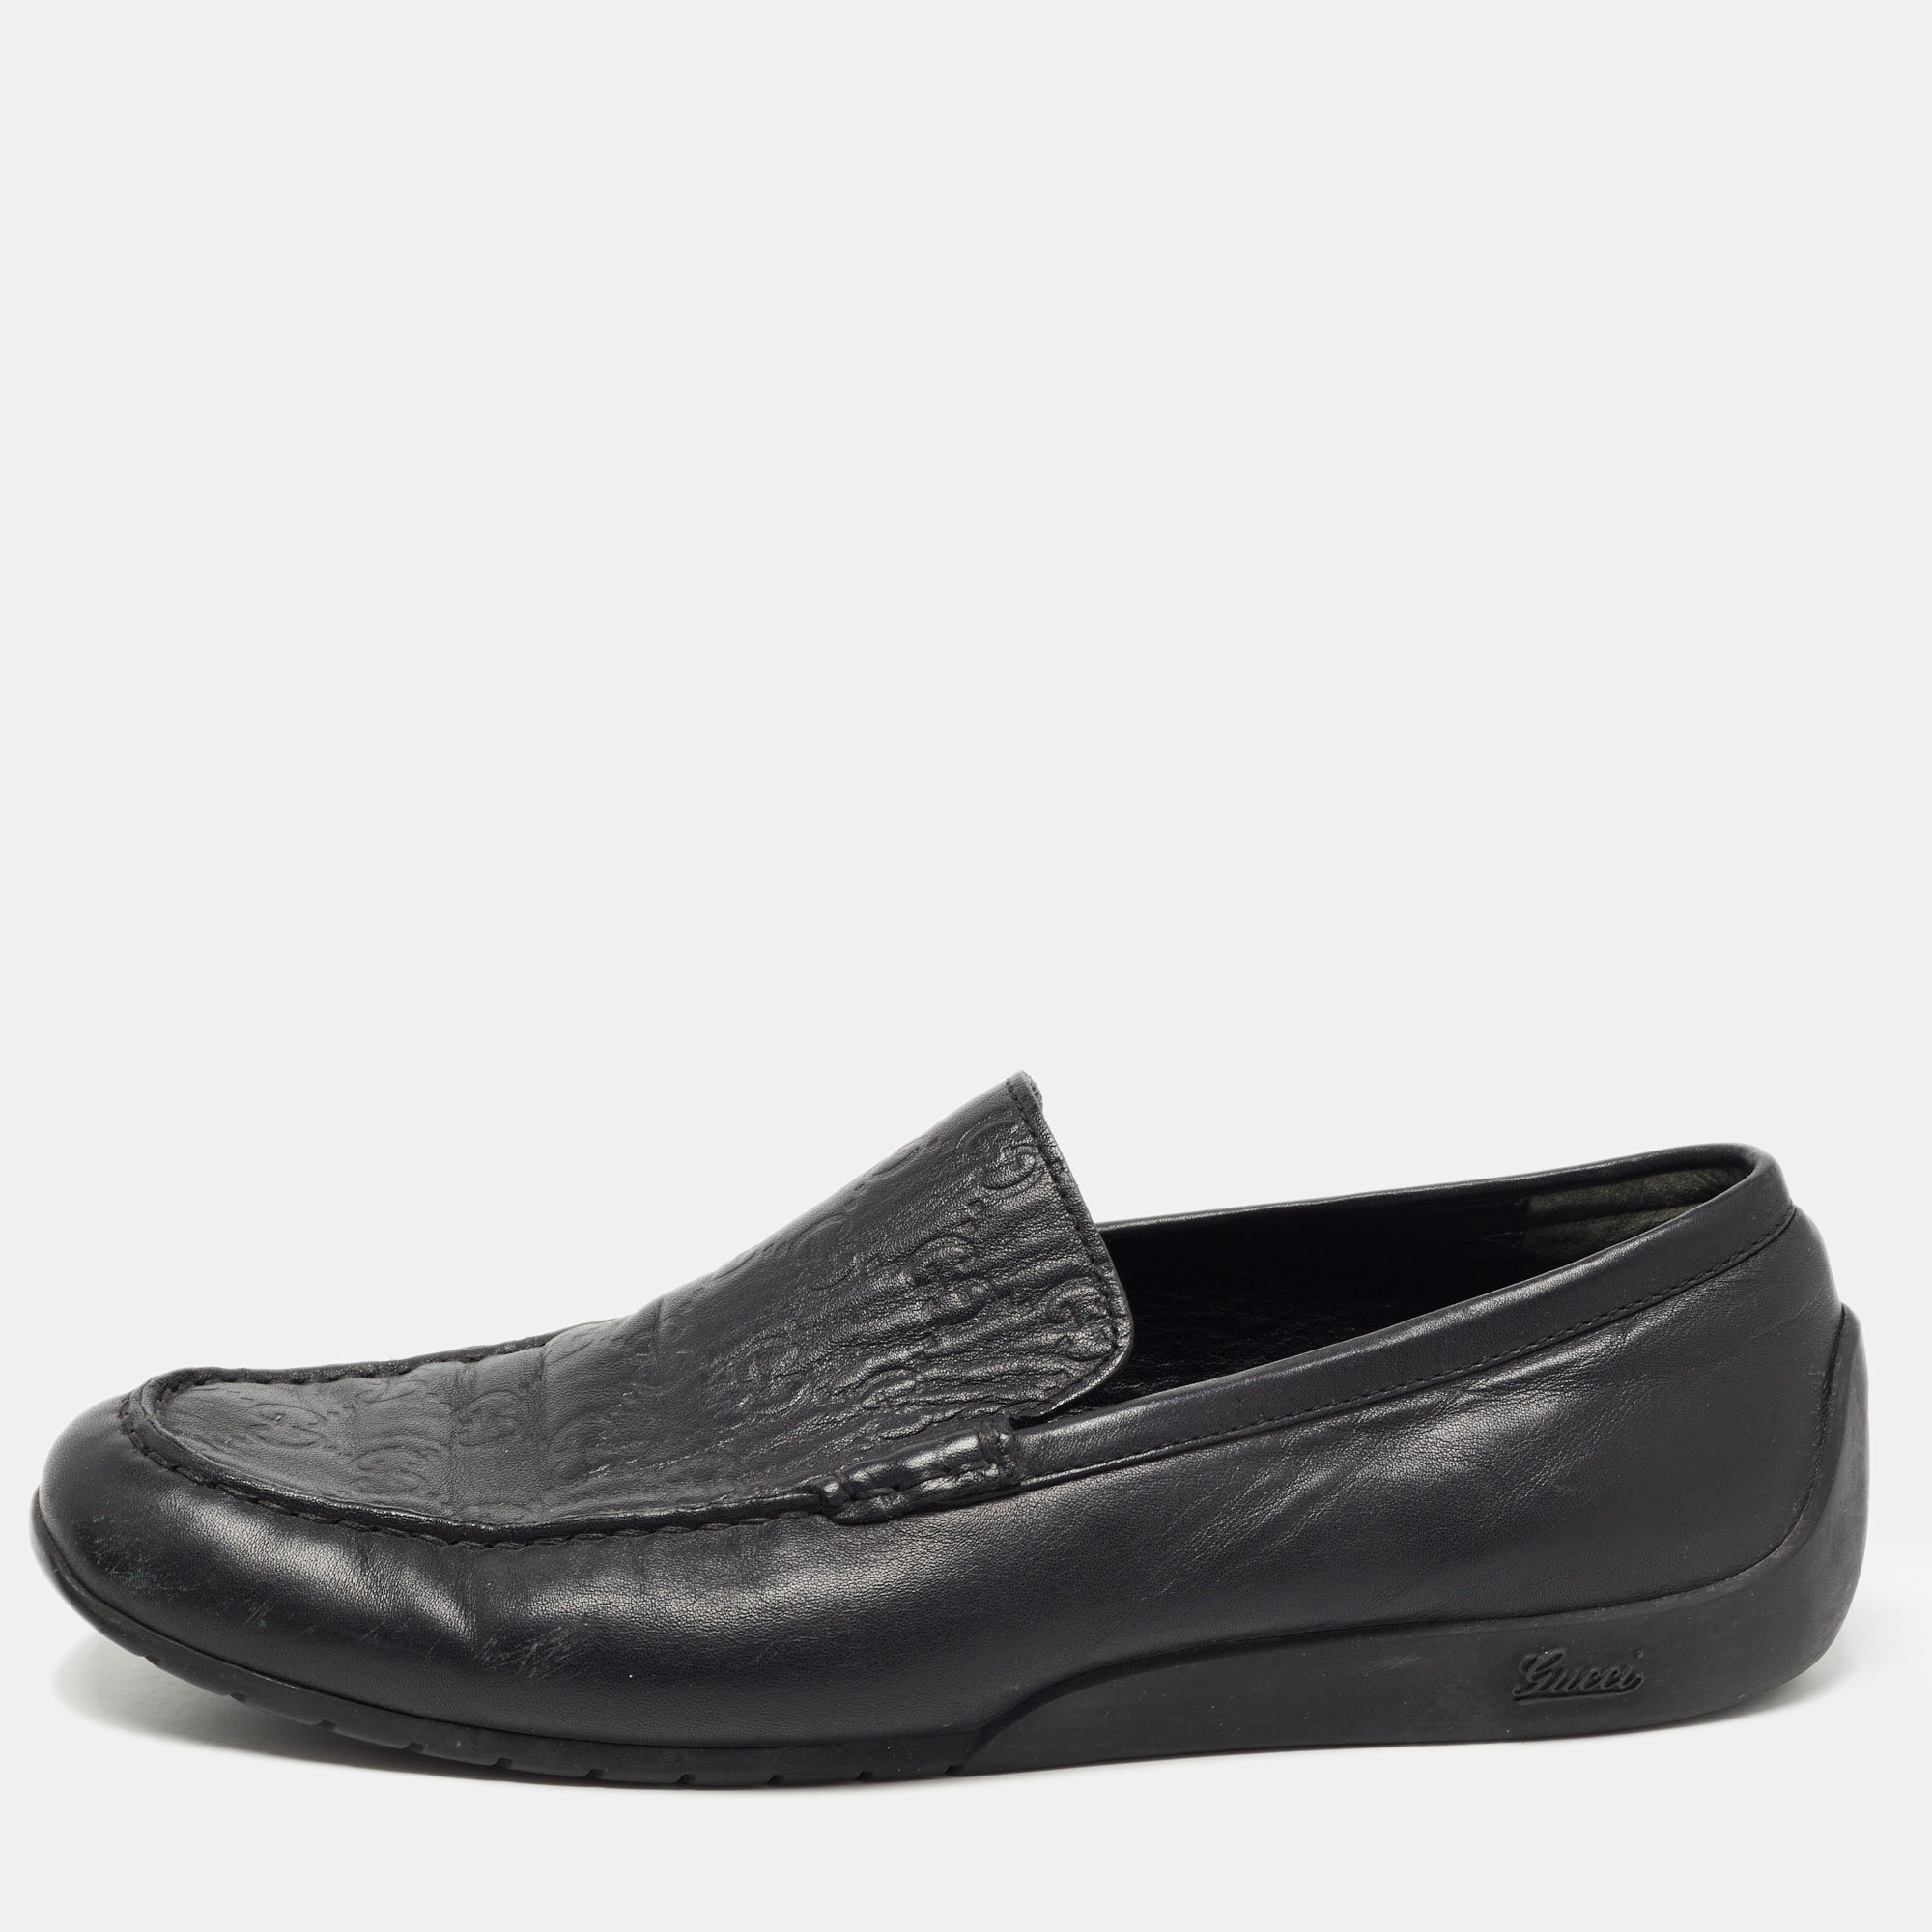 Gucci Black Guccissima Leather Slip On Loafers Size 42